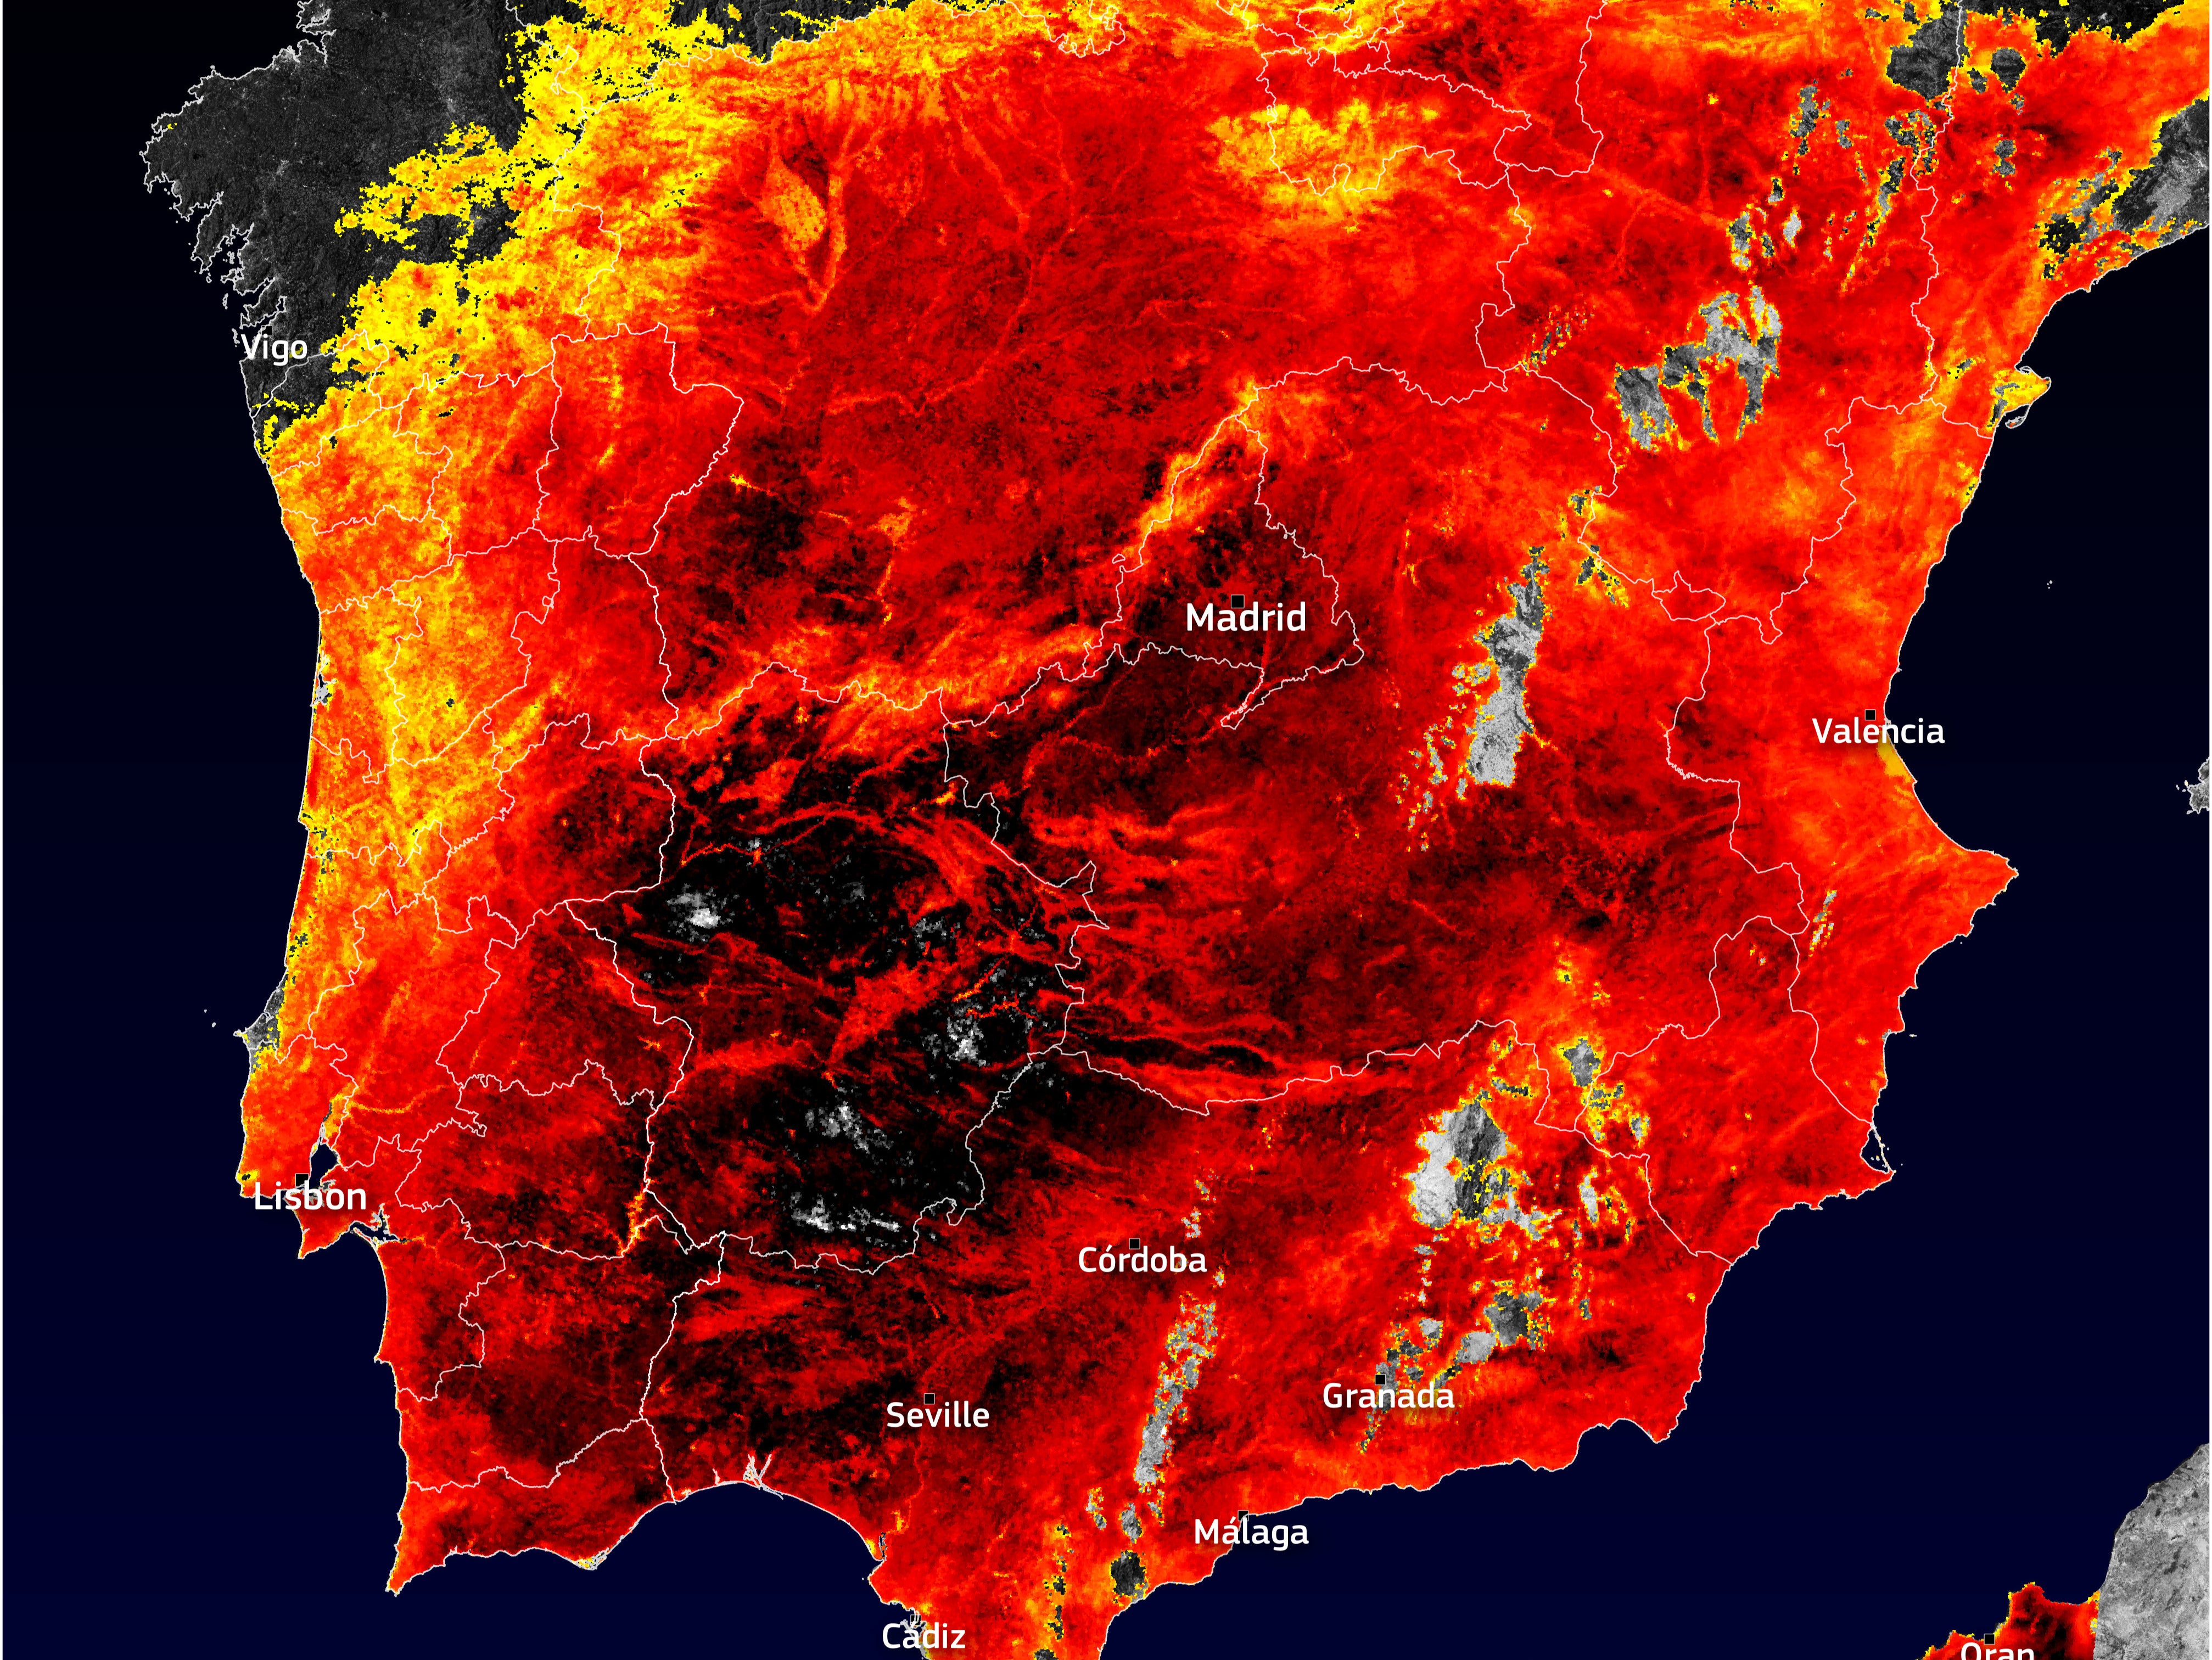 Heat map showing extremely hot areas in black